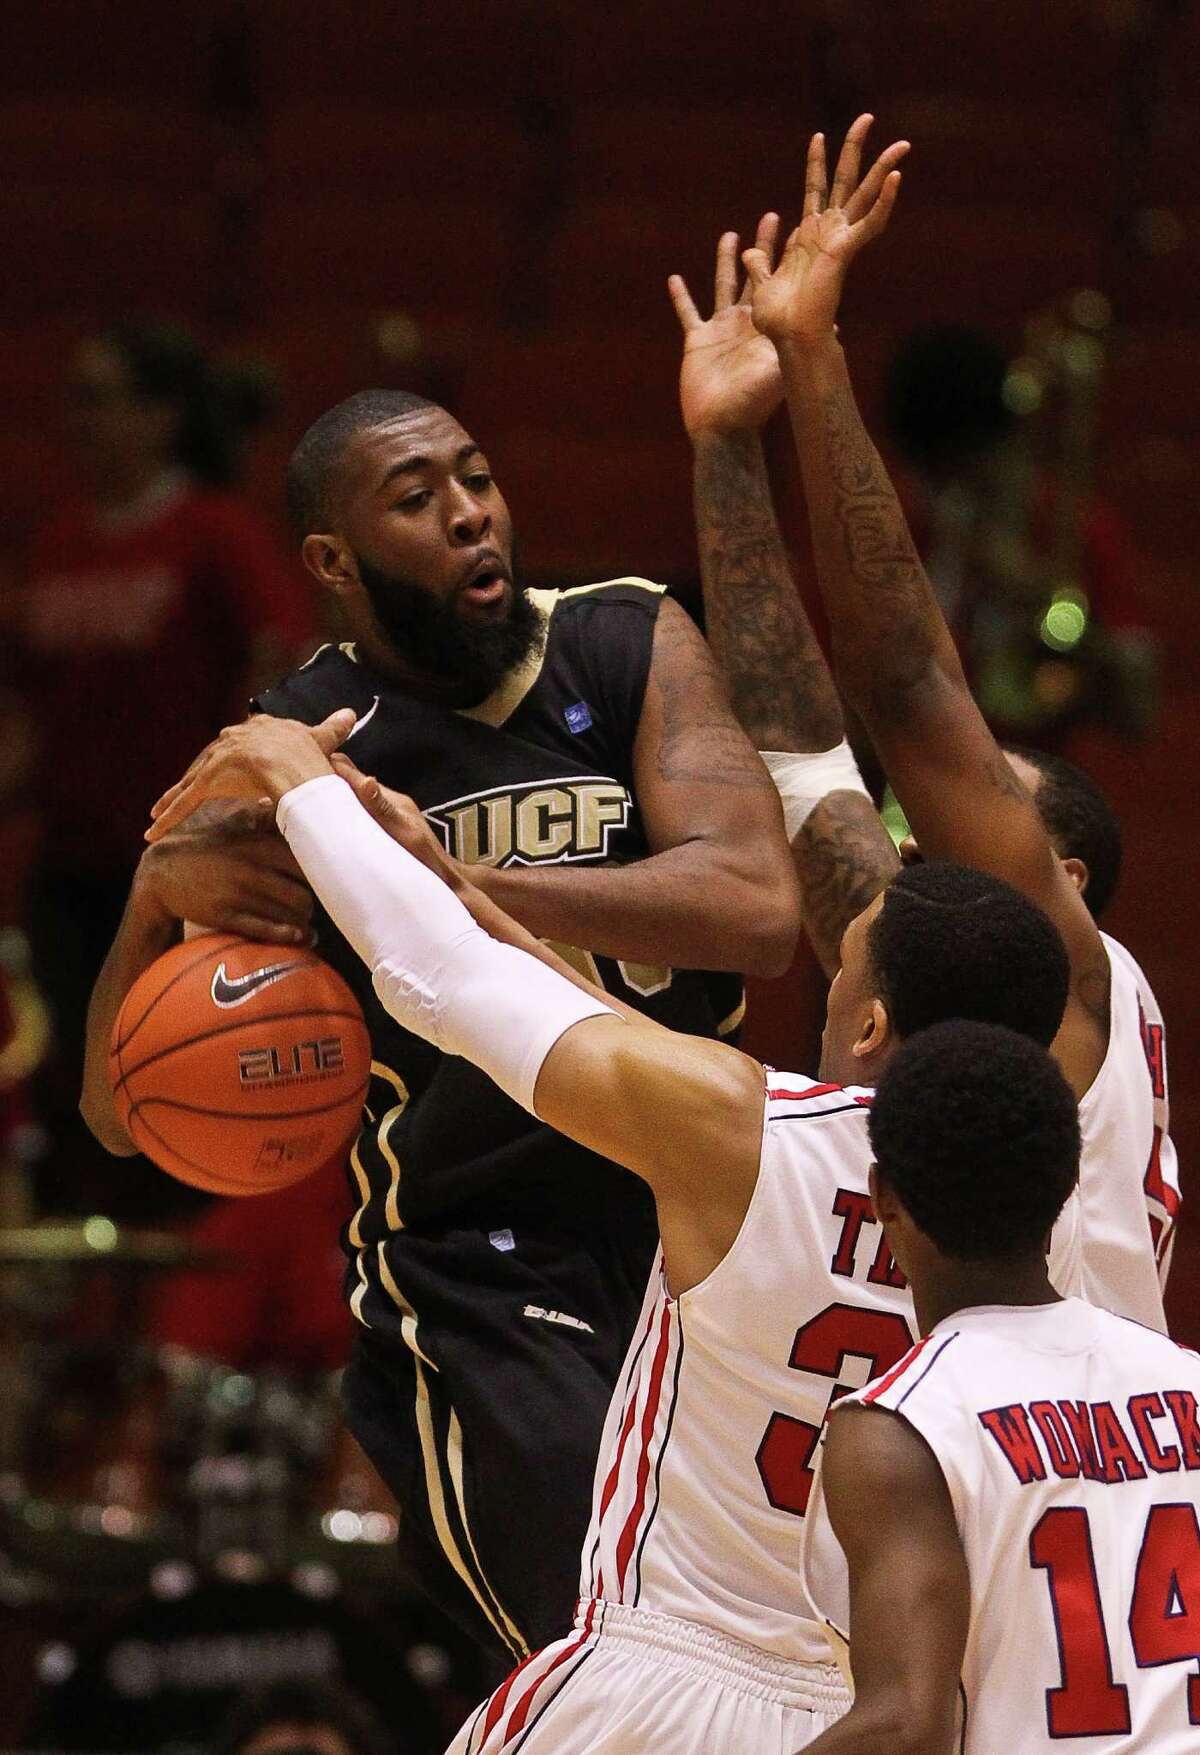 Houston's TaShawn Thomas gets a little more than the ball as he defends against UCF's Keith Clanton in the second half.